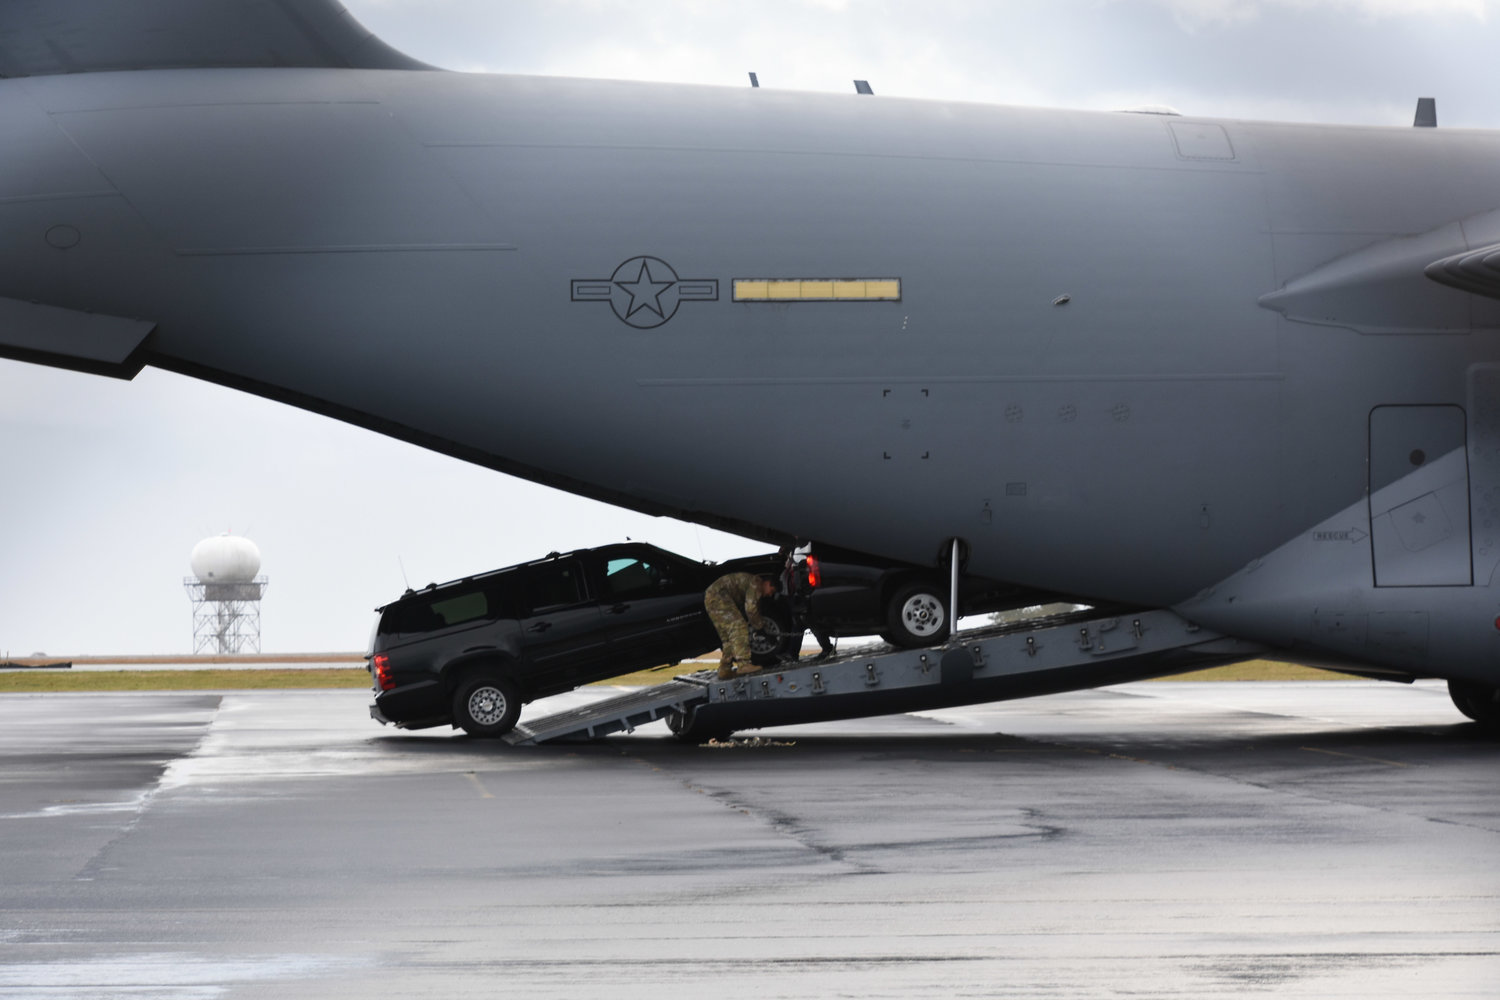 Vehicles are unloaded from a U.S. Air Force C-17A Globemaster cargo plane at Nantucket Memorial Airport Monday morning.